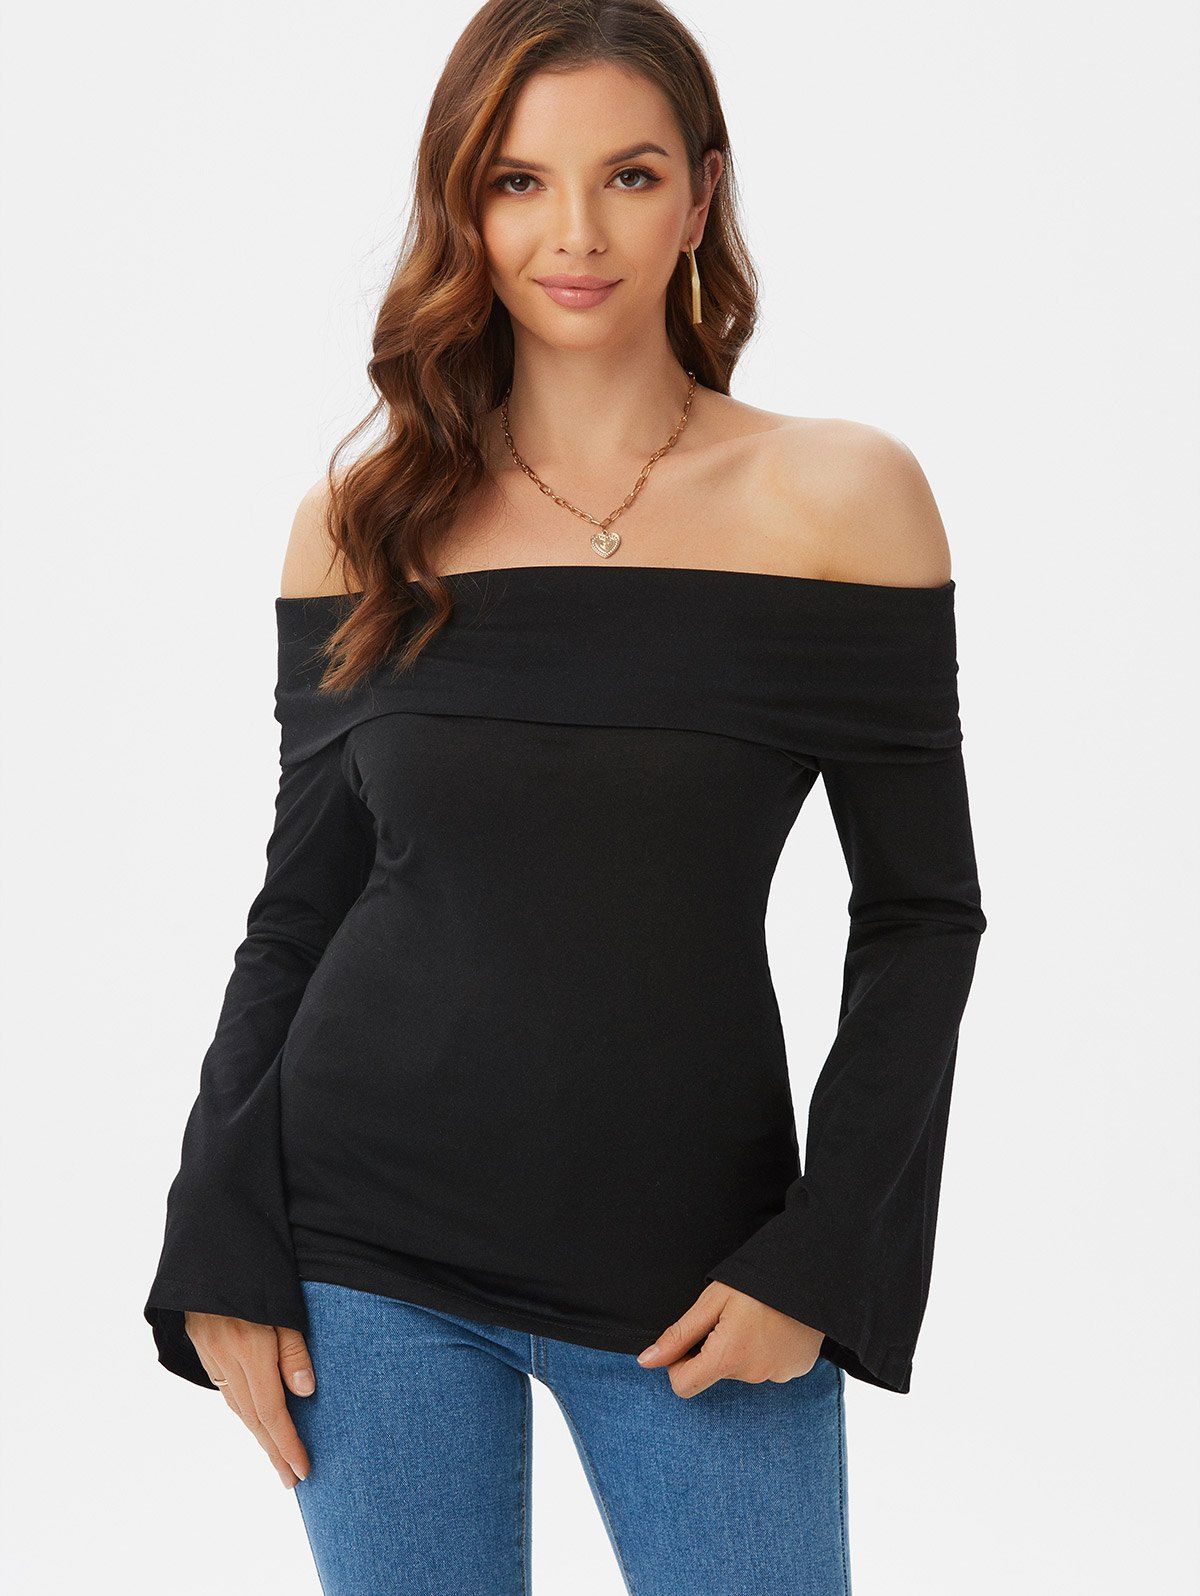 Off The Shoulder Flare Bell Sleeve Fold Over T-shirt - BLACK XXXL